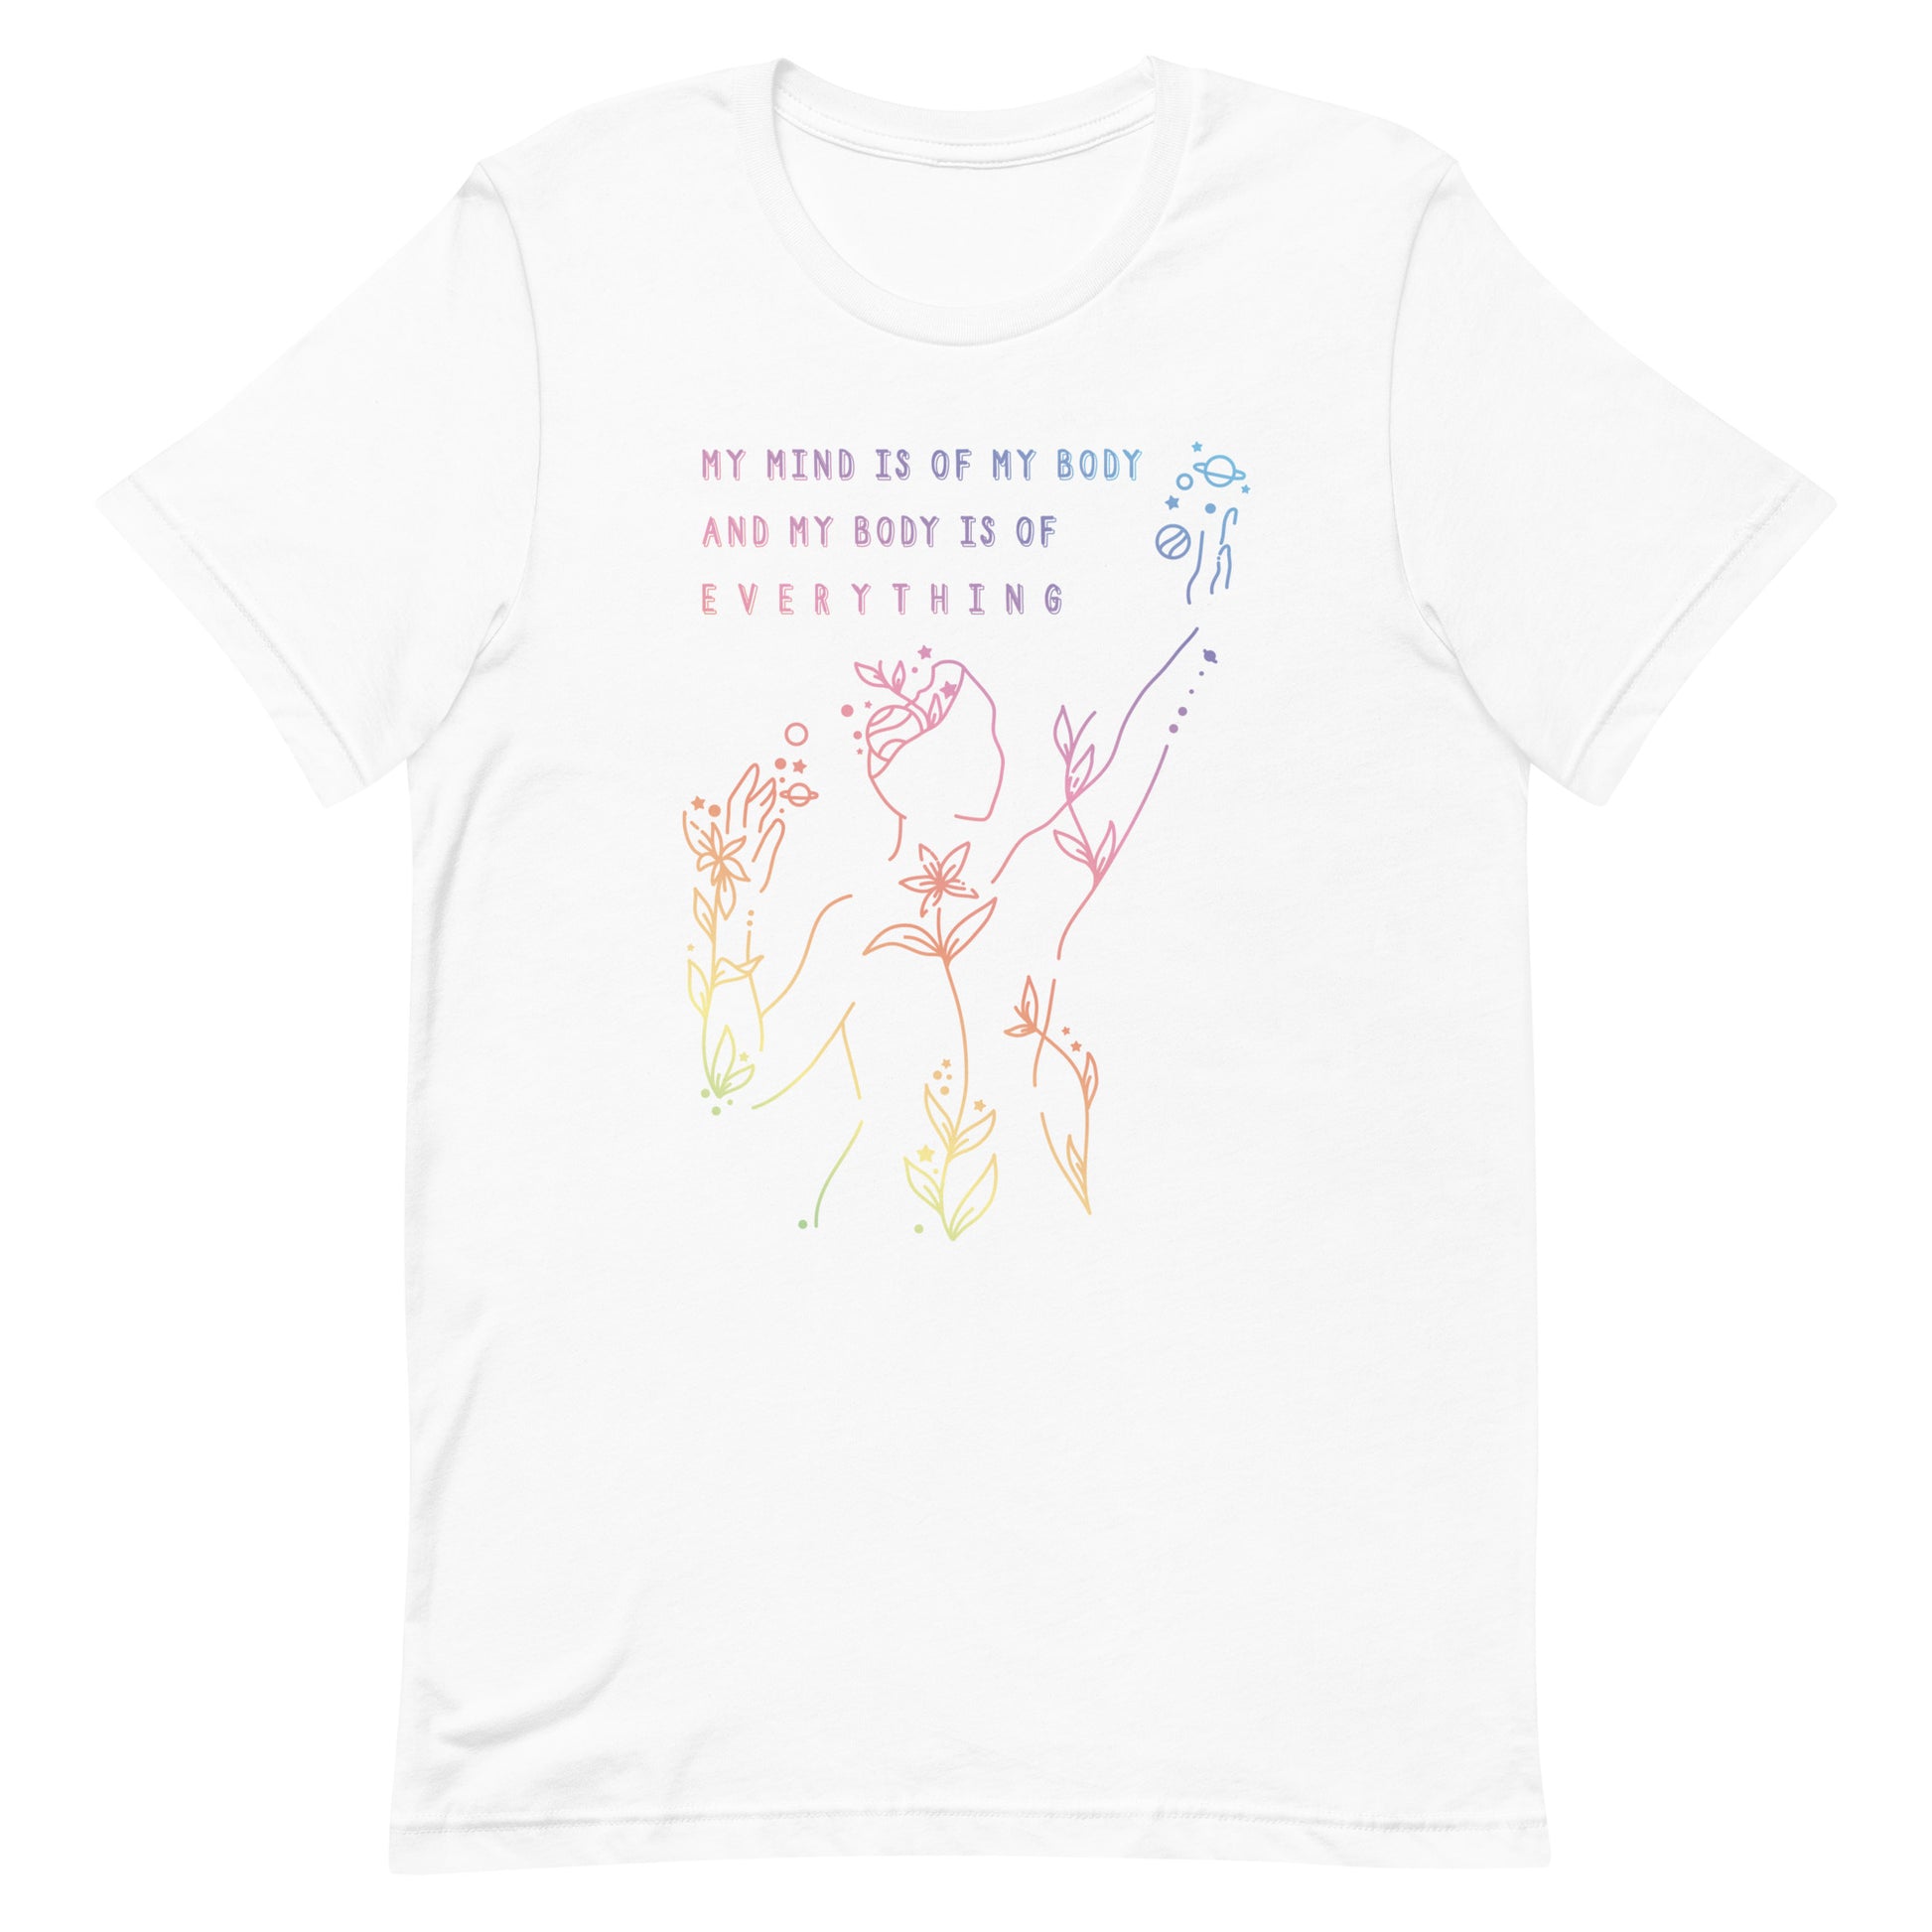 A white crewneck t-shirt, featuring an abstract illustration of a figure whose body is spreading out into plants and planets and stars. Text above the figure reads "My mind is of my body and my body is of everything."